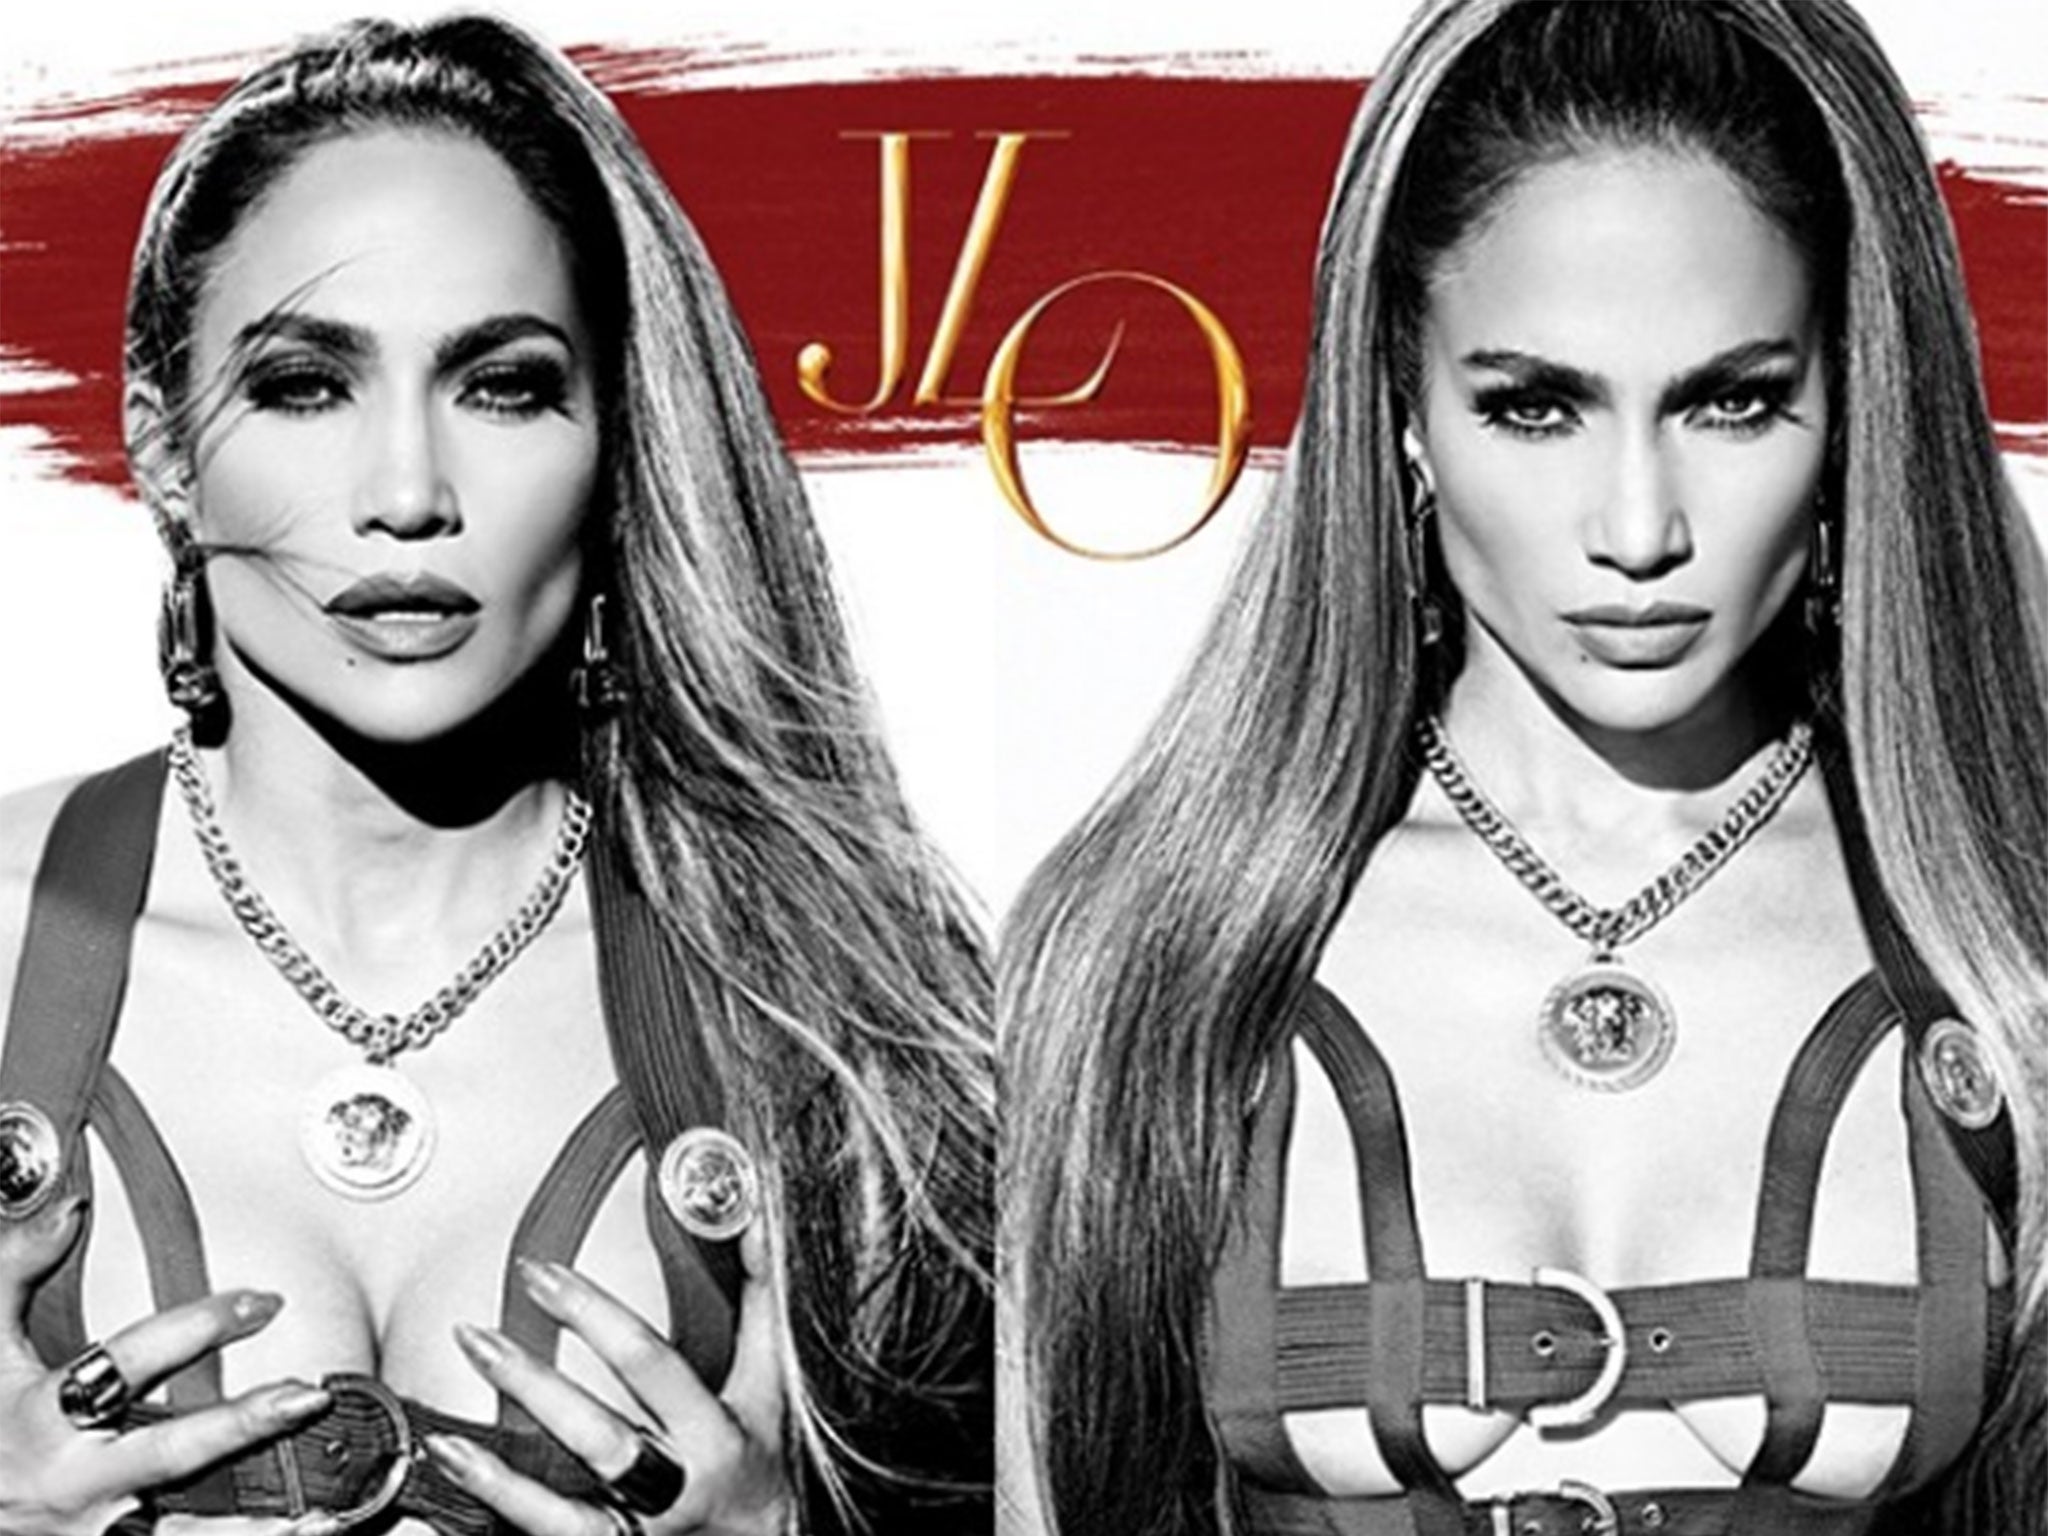 Jennifer Lopez cups her own breasts in the AKA cover art